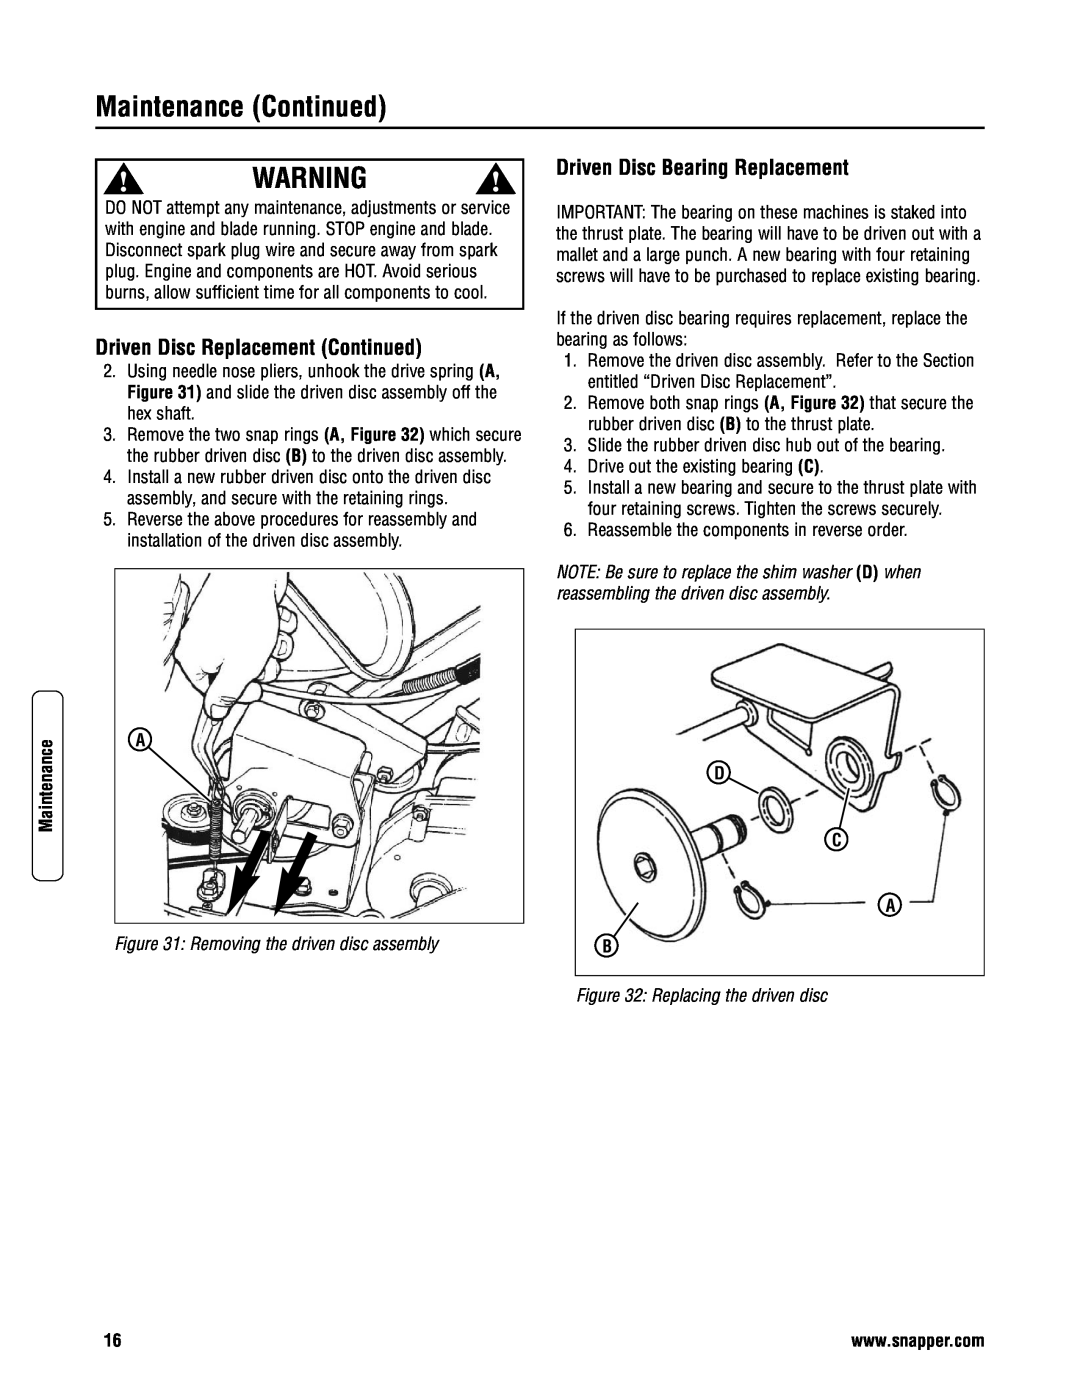 Snapper 2167519B Driven Disc Replacement Continued, Driven Disc Bearing Replacement, Removing the driven disc assembly 